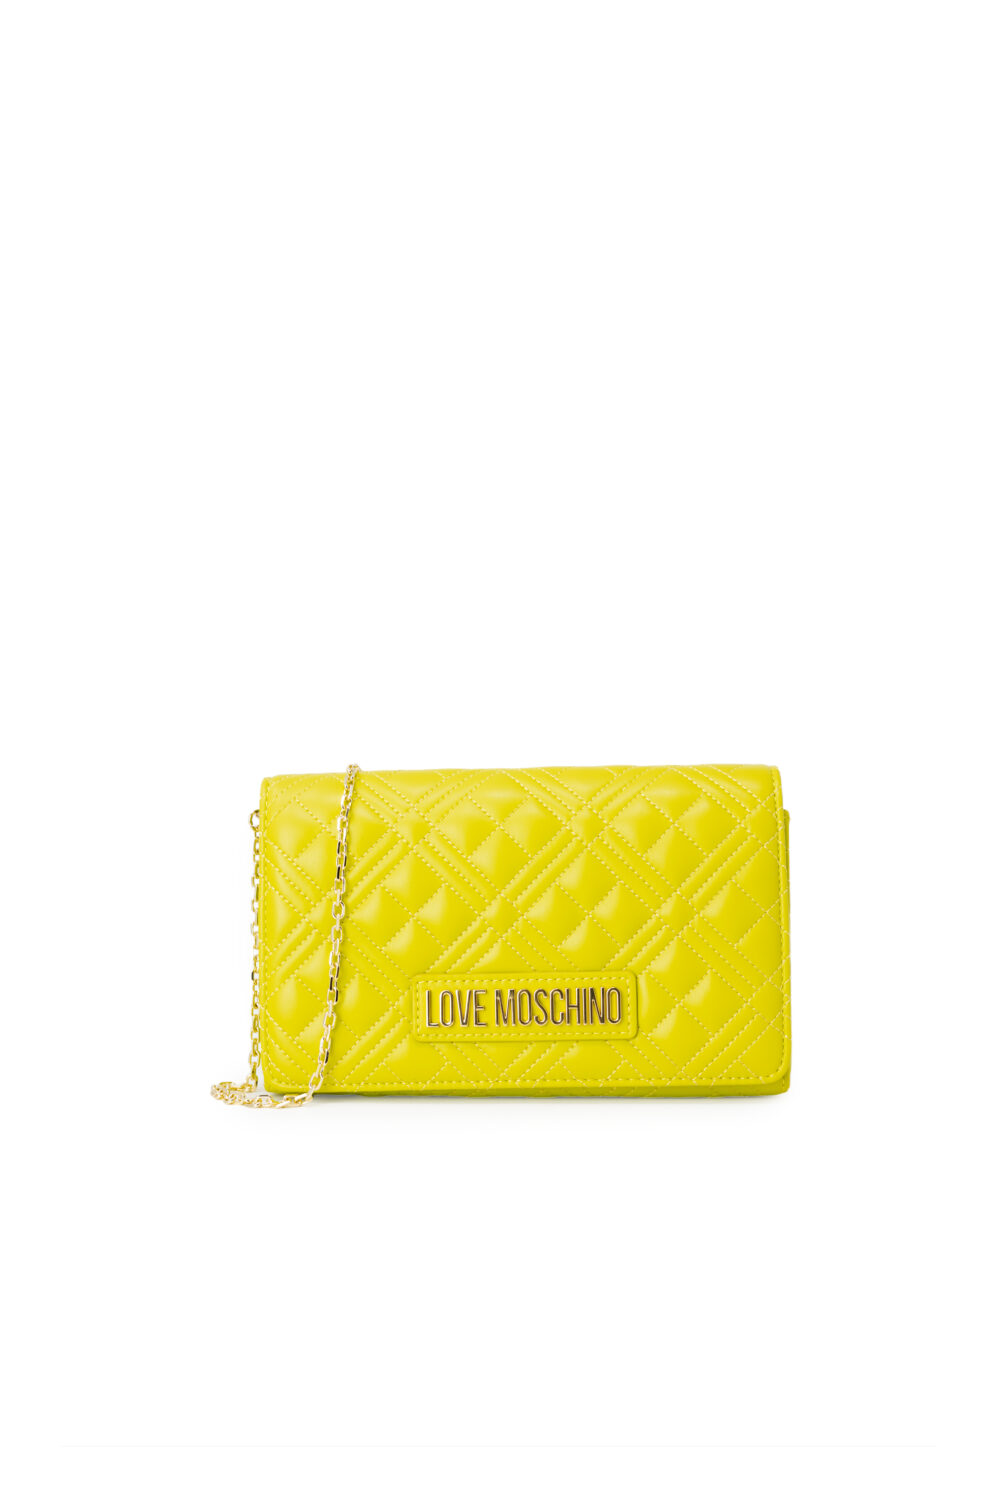 Borsa Love Moschino quilted Giallo lime - Foto 1